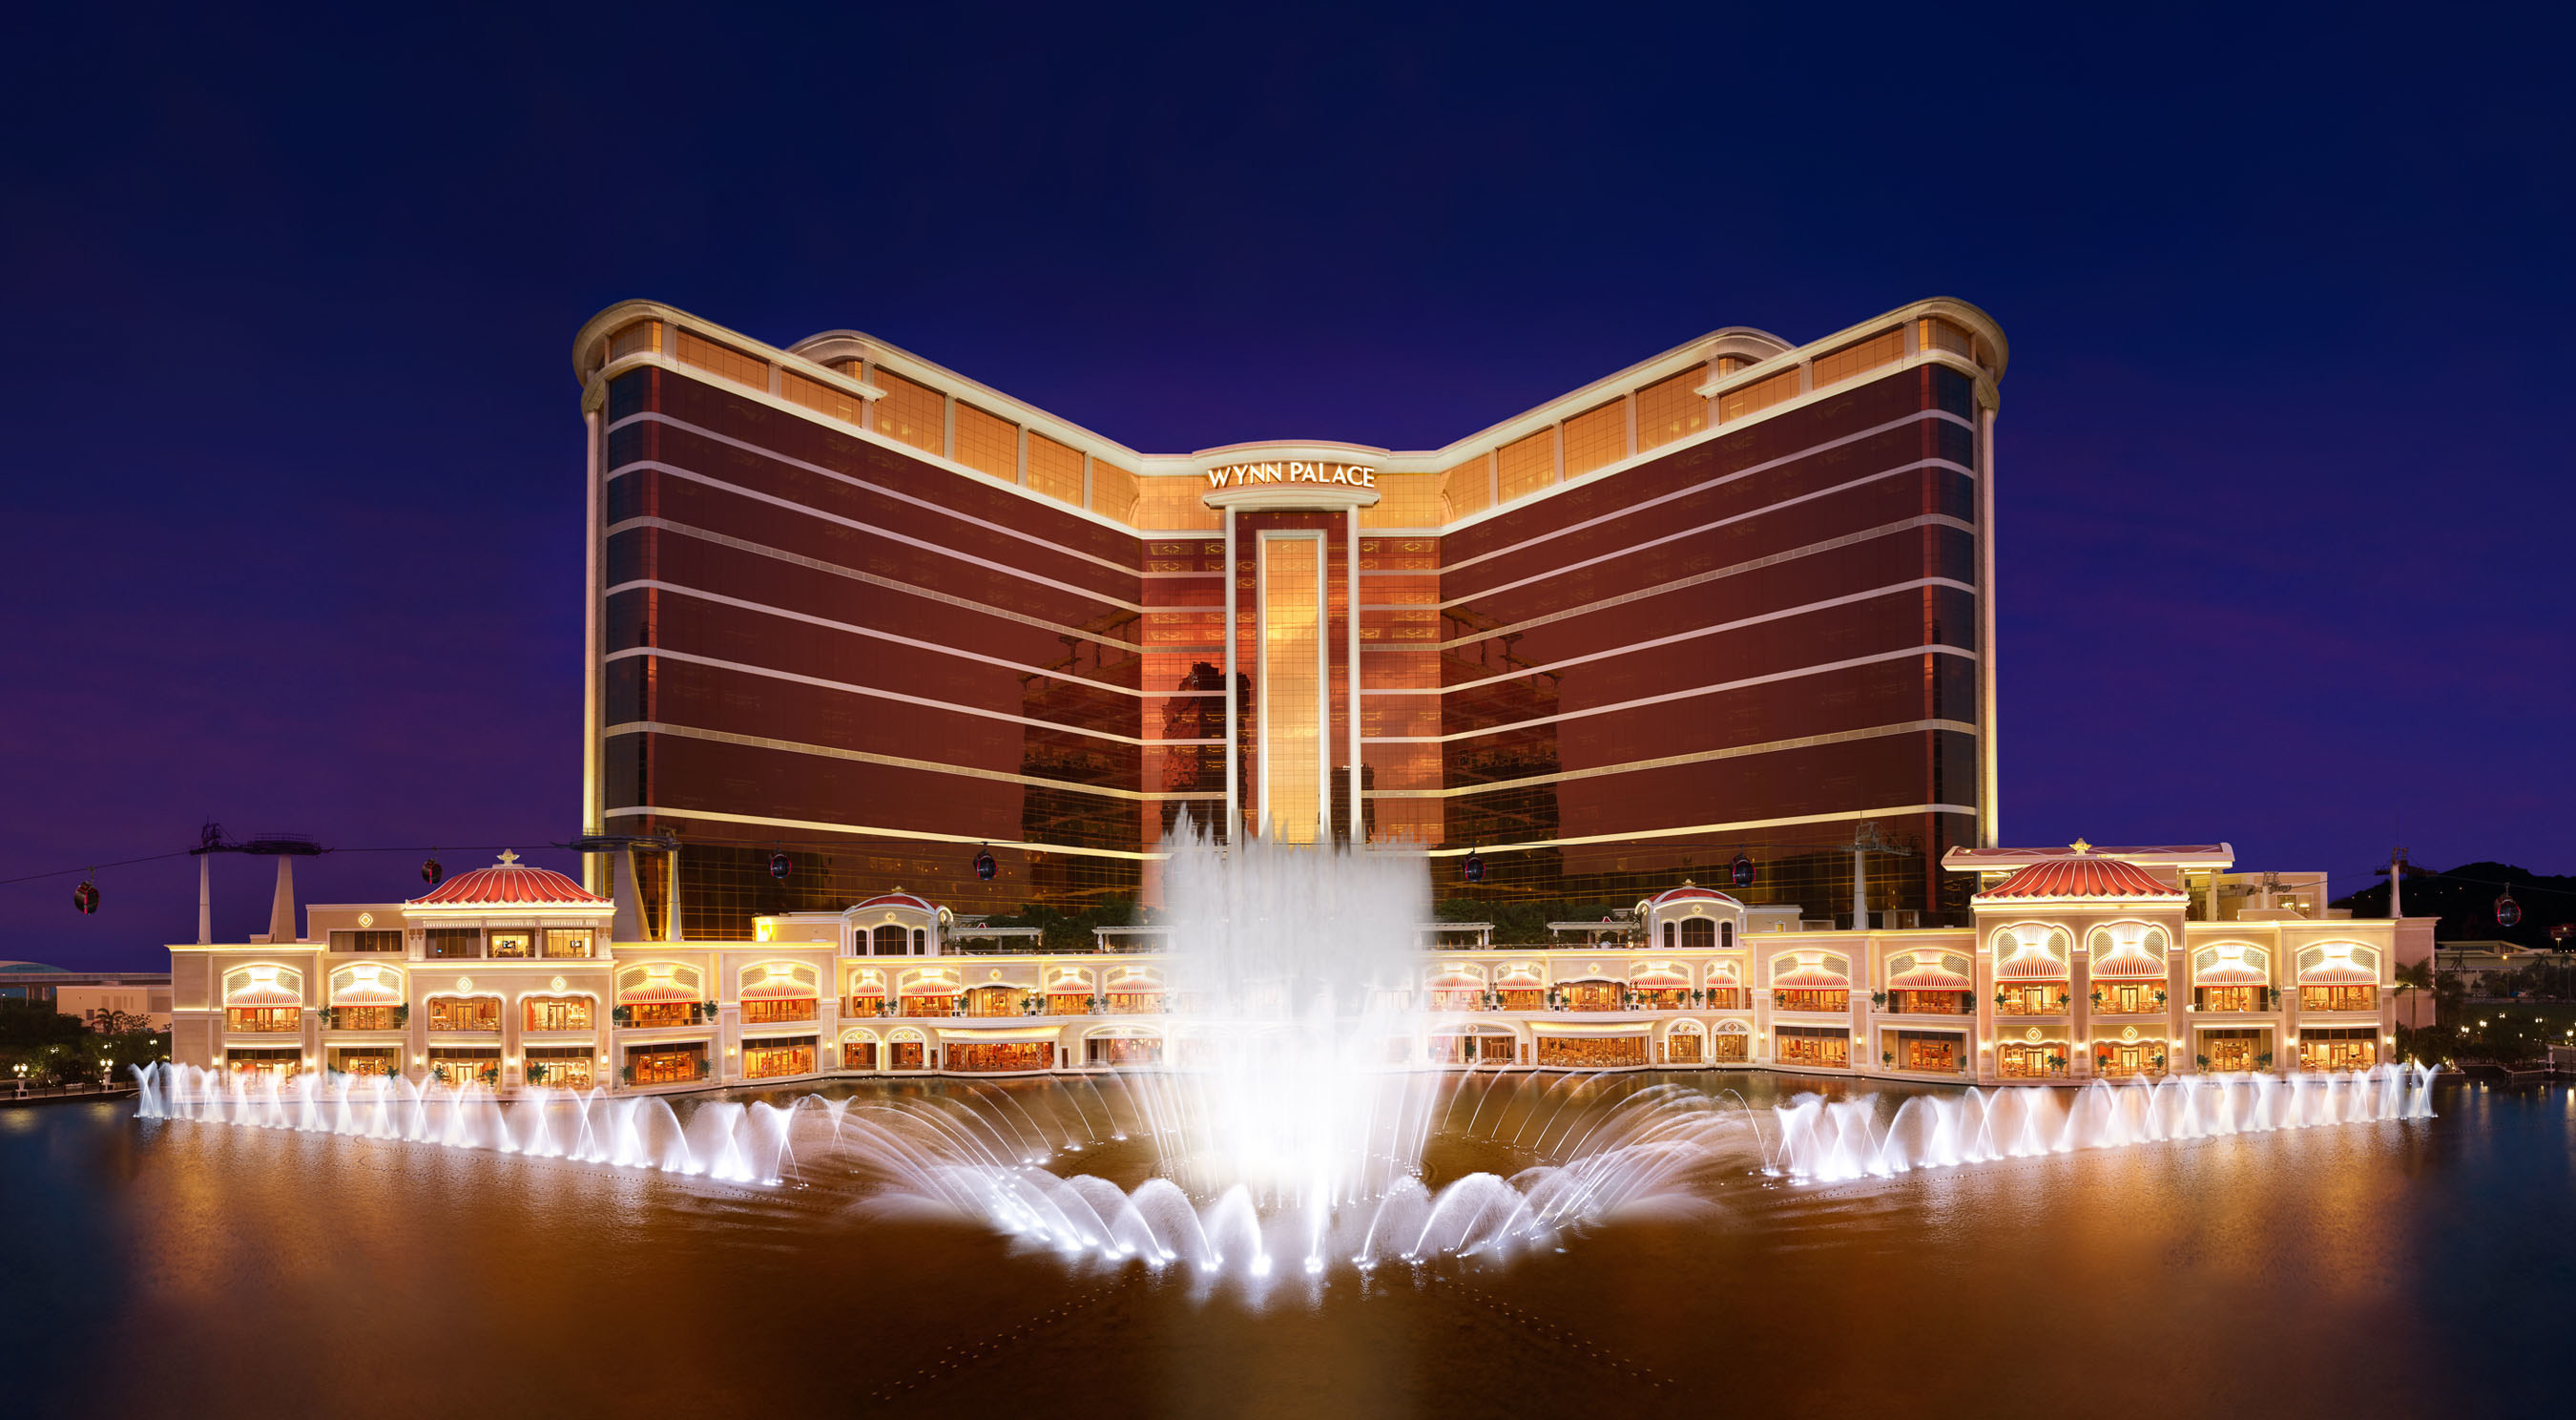 Wynn Palace is the culmination of Steve Wynn’s more than 45 years in hospitality, setting a new standard for luxury and elegance.